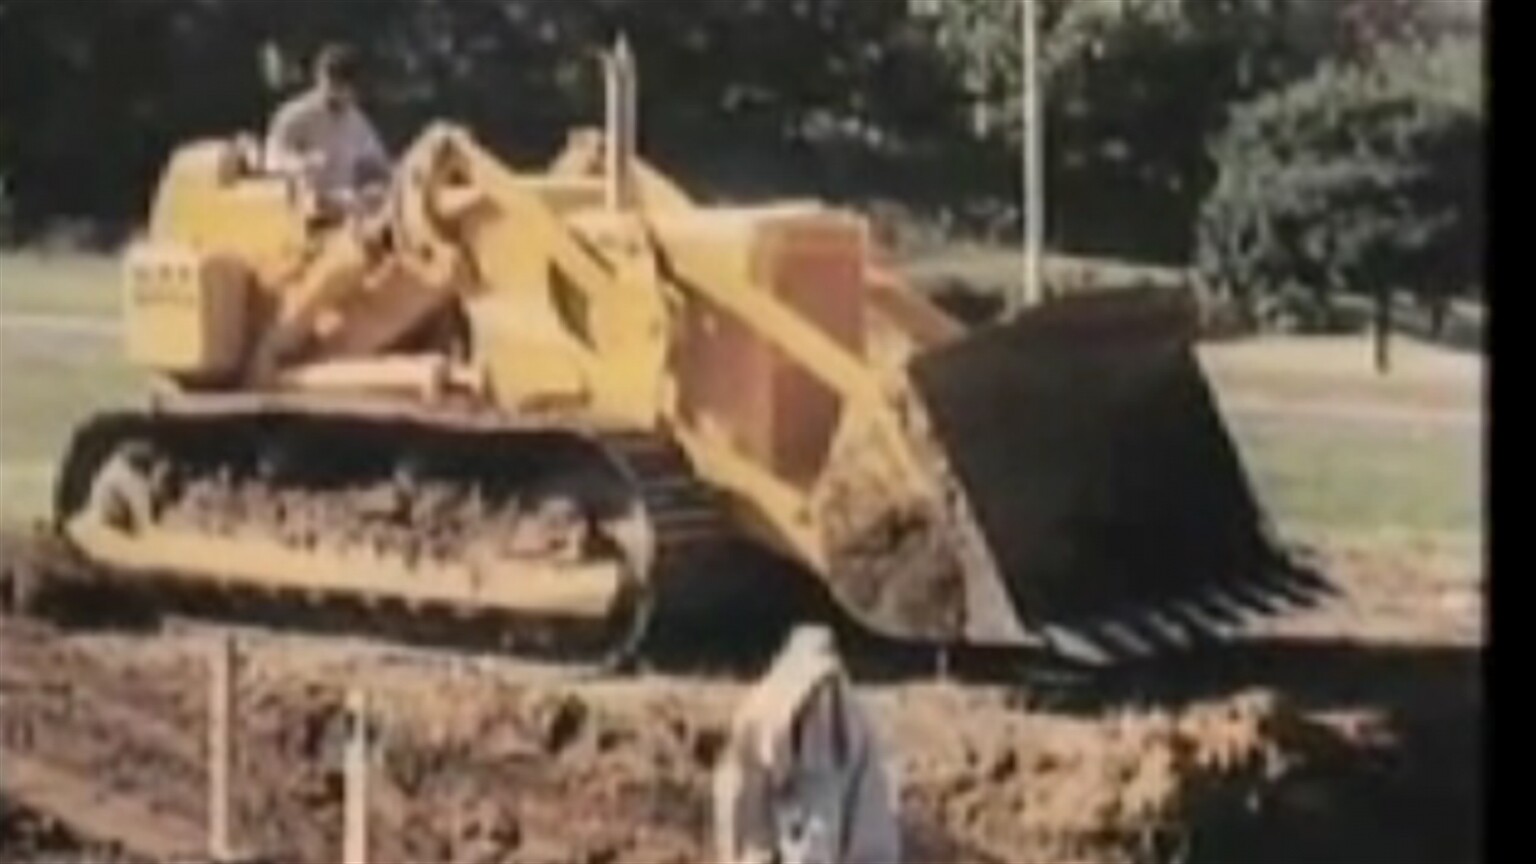 Old Cat safety film still delivers the message